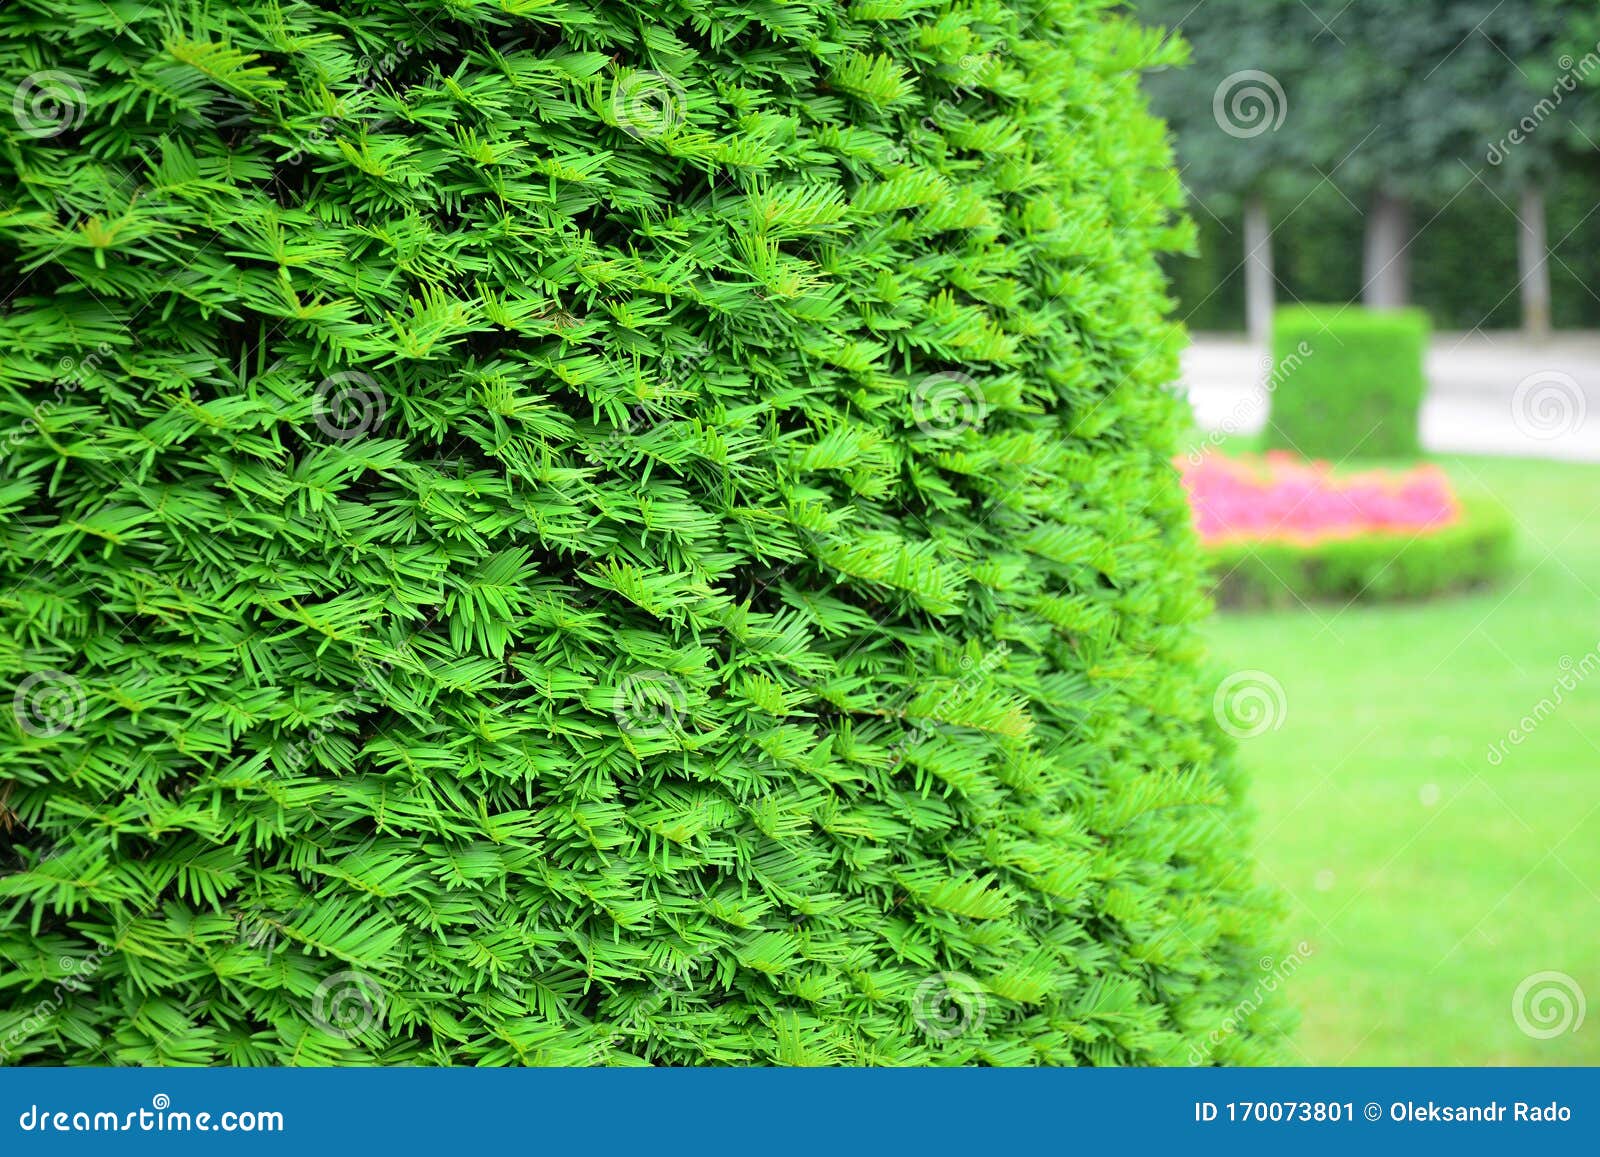 taxus baccata, european yew hedge background. yew hedging. pruning yew hedges